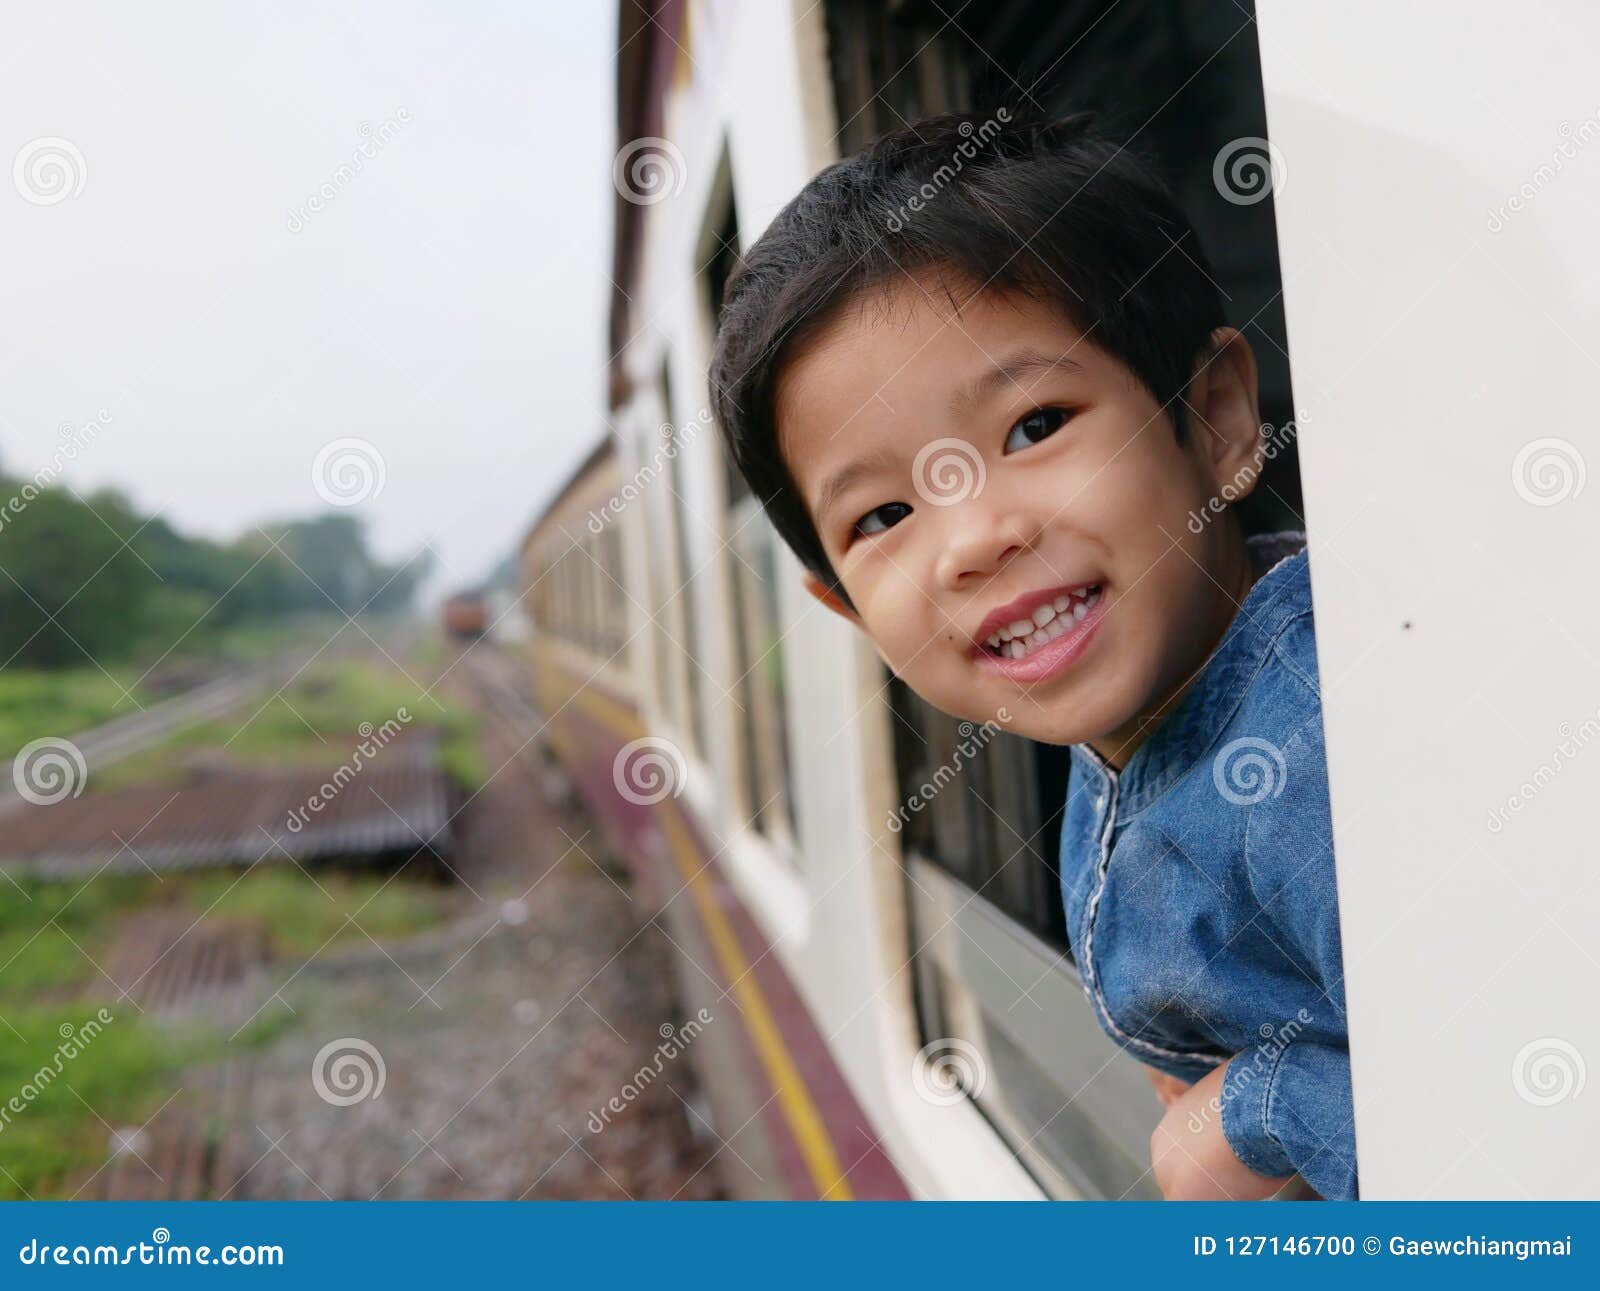 little asian baby girl enjoys sticking her head out of a train window and having the wind whips against her face